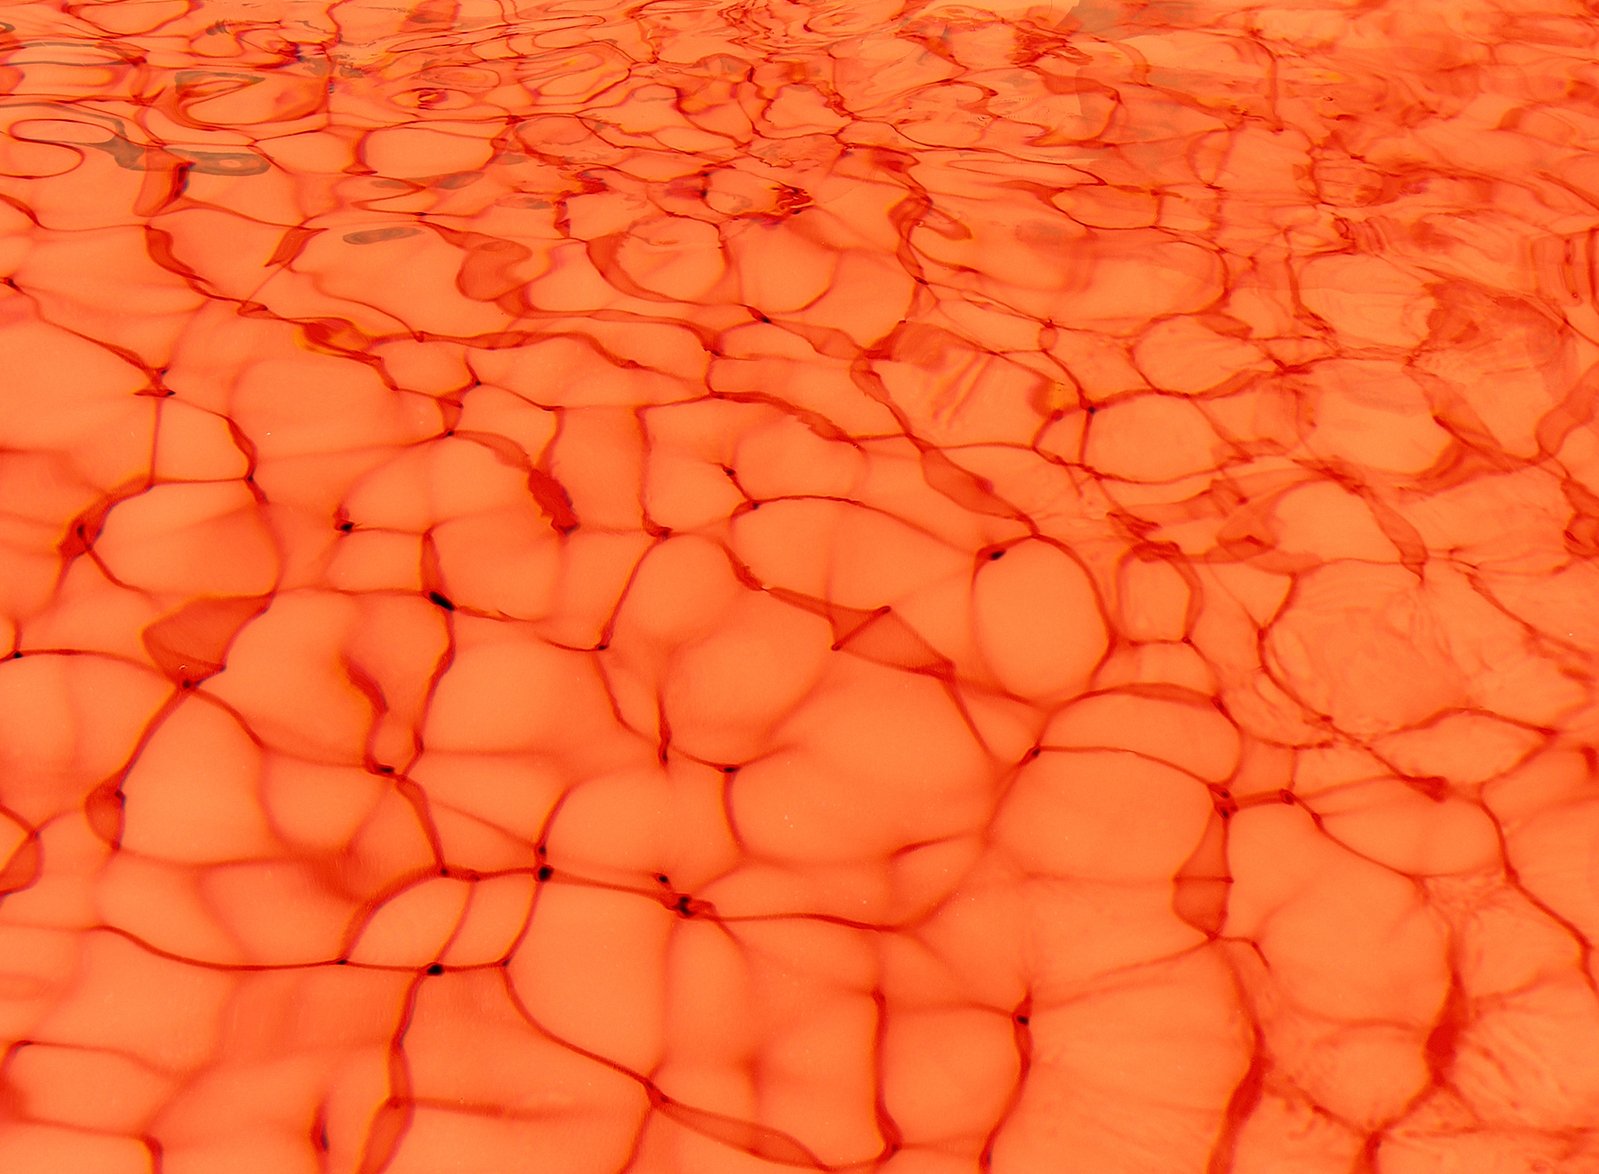 the surface of an abstract, orange and black pattern